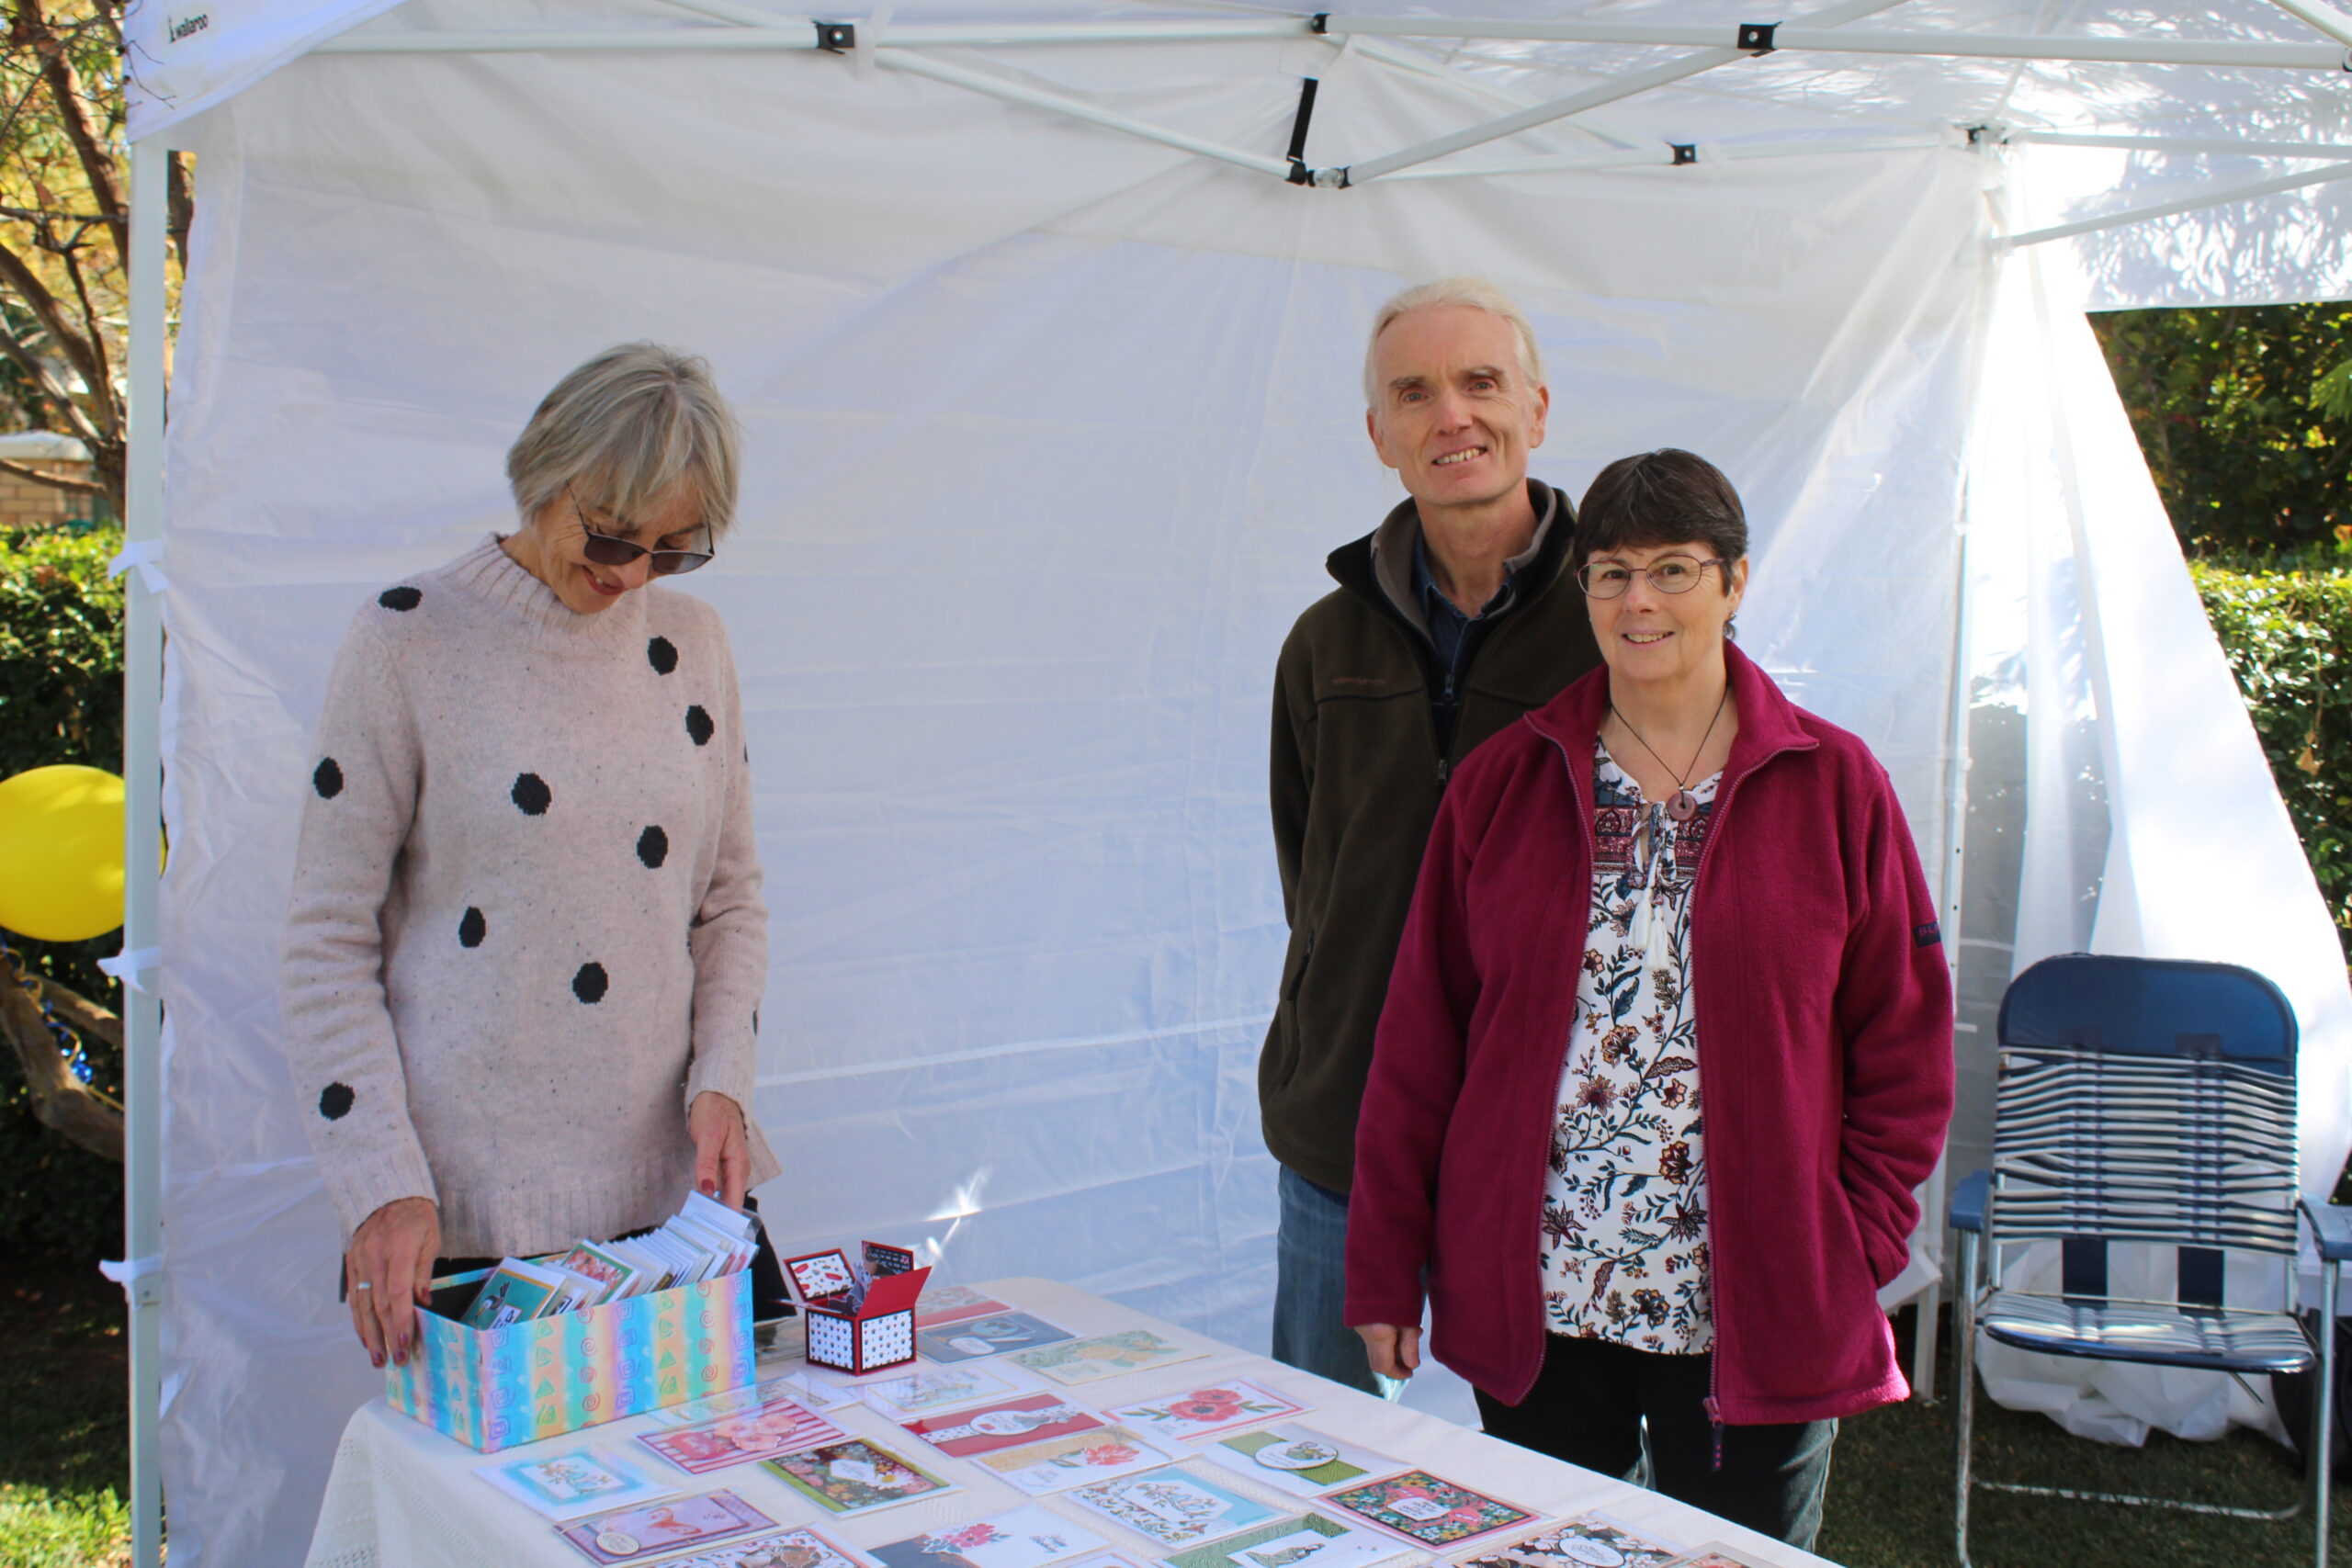 Nanette Watson browsing the handmade goods at Donna’s Paper Craft, with Graeme and Donna Compton.